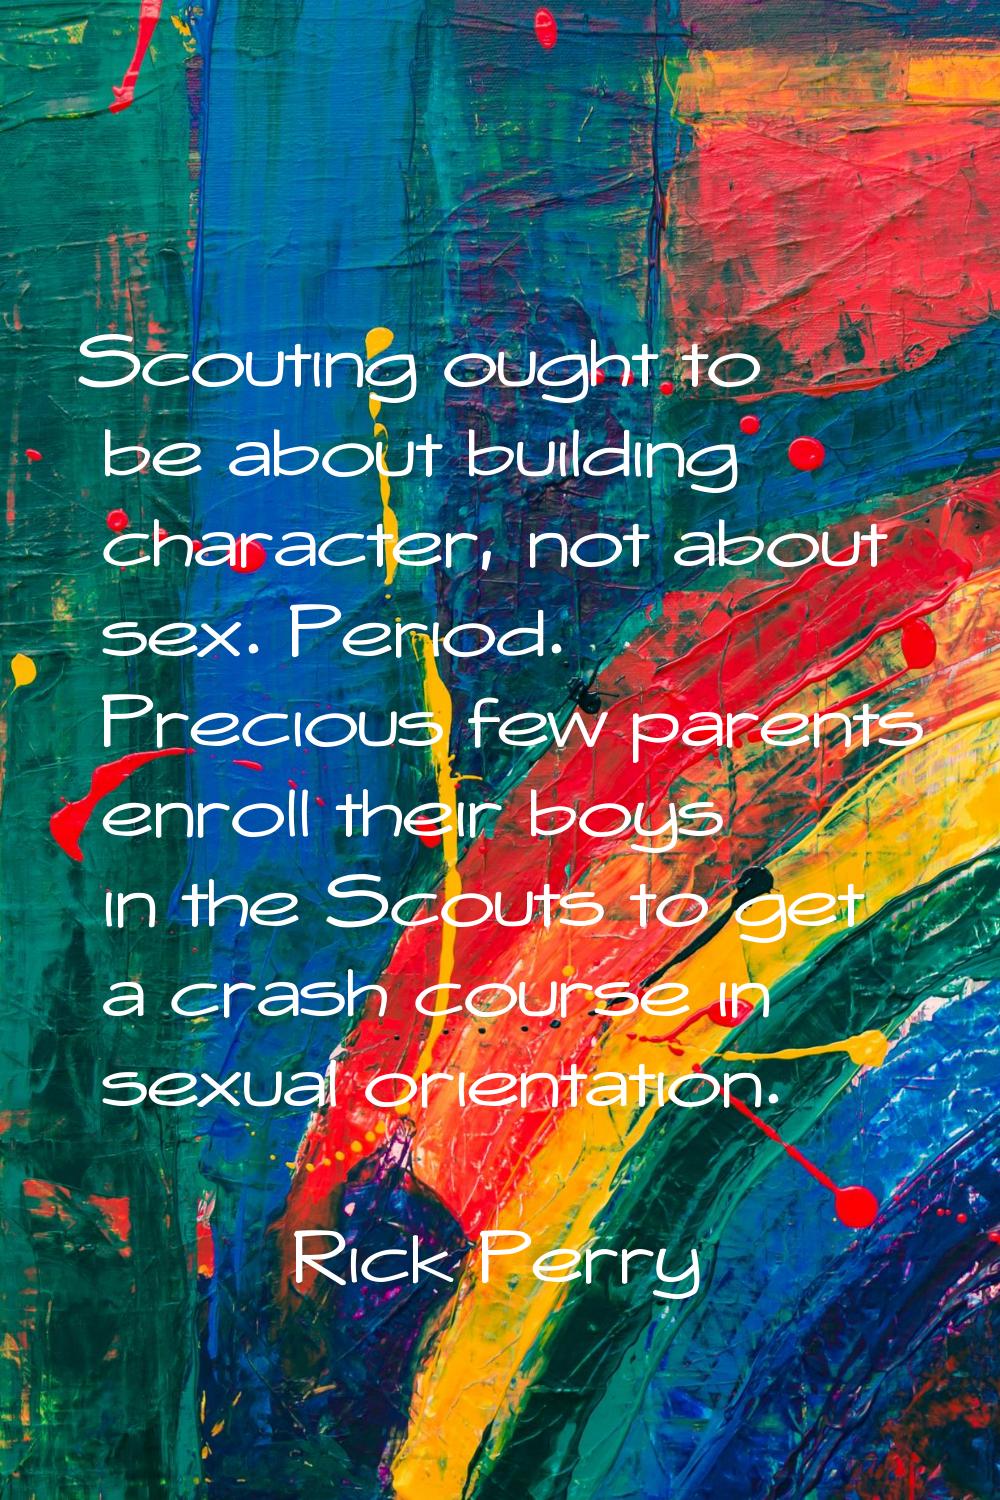 Scouting ought to be about building character, not about sex. Period. Precious few parents enroll t